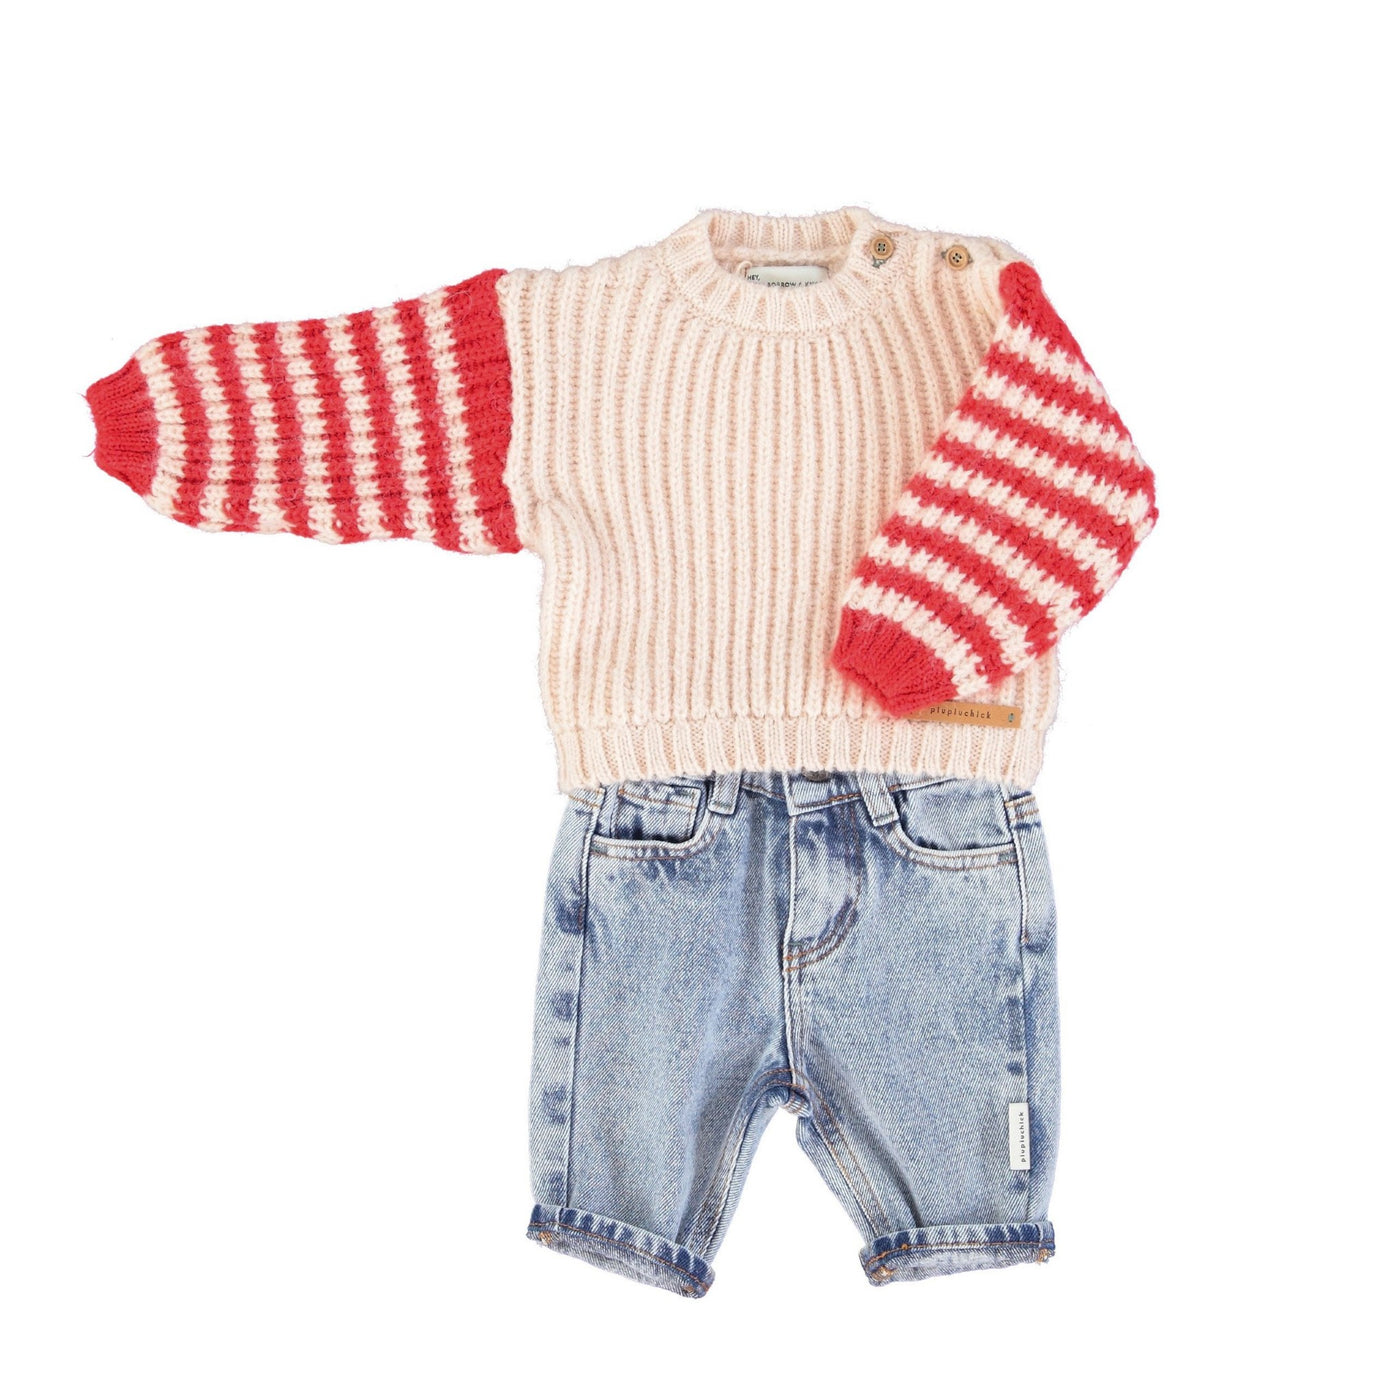 Piupiuchick knitted baby jumper | raw & red stripes